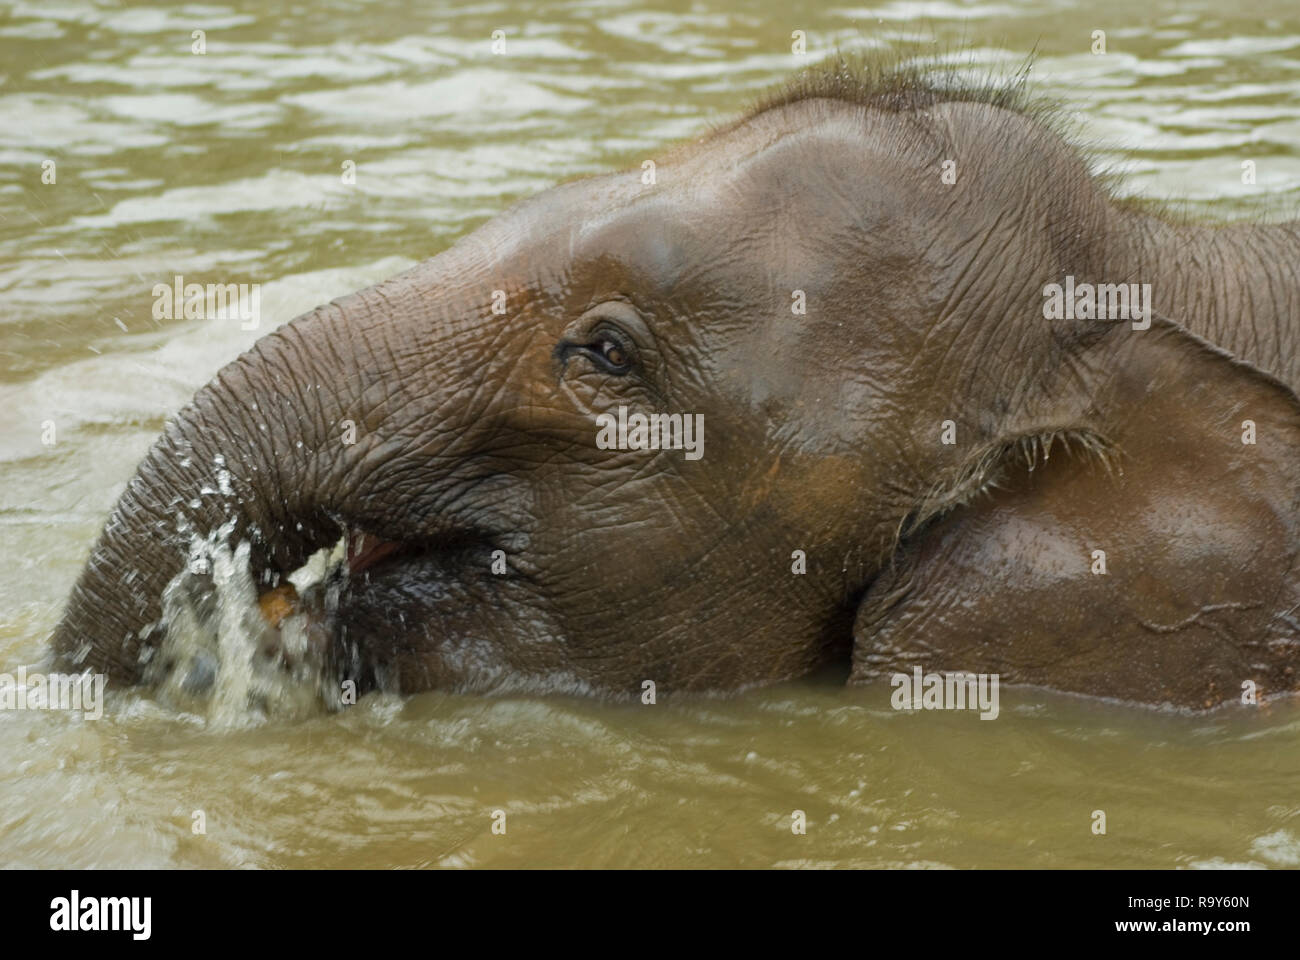 The Borneo elephant, also called the Borneo pygmy elephant, is a subspecies of Asian elephant that inhabits northeastern Borneo, in Malaysia. Stock Photo